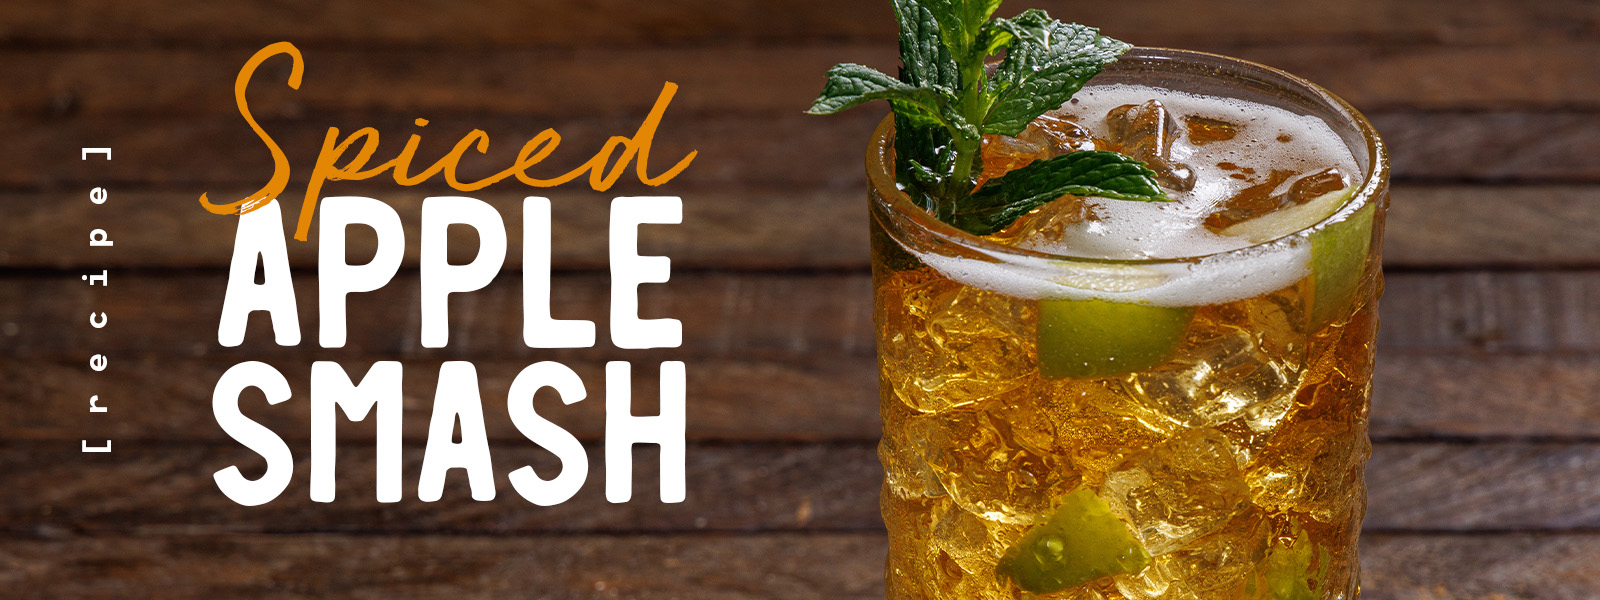 Sip & Celebrate with Our Spiced Apple Smash Recipe